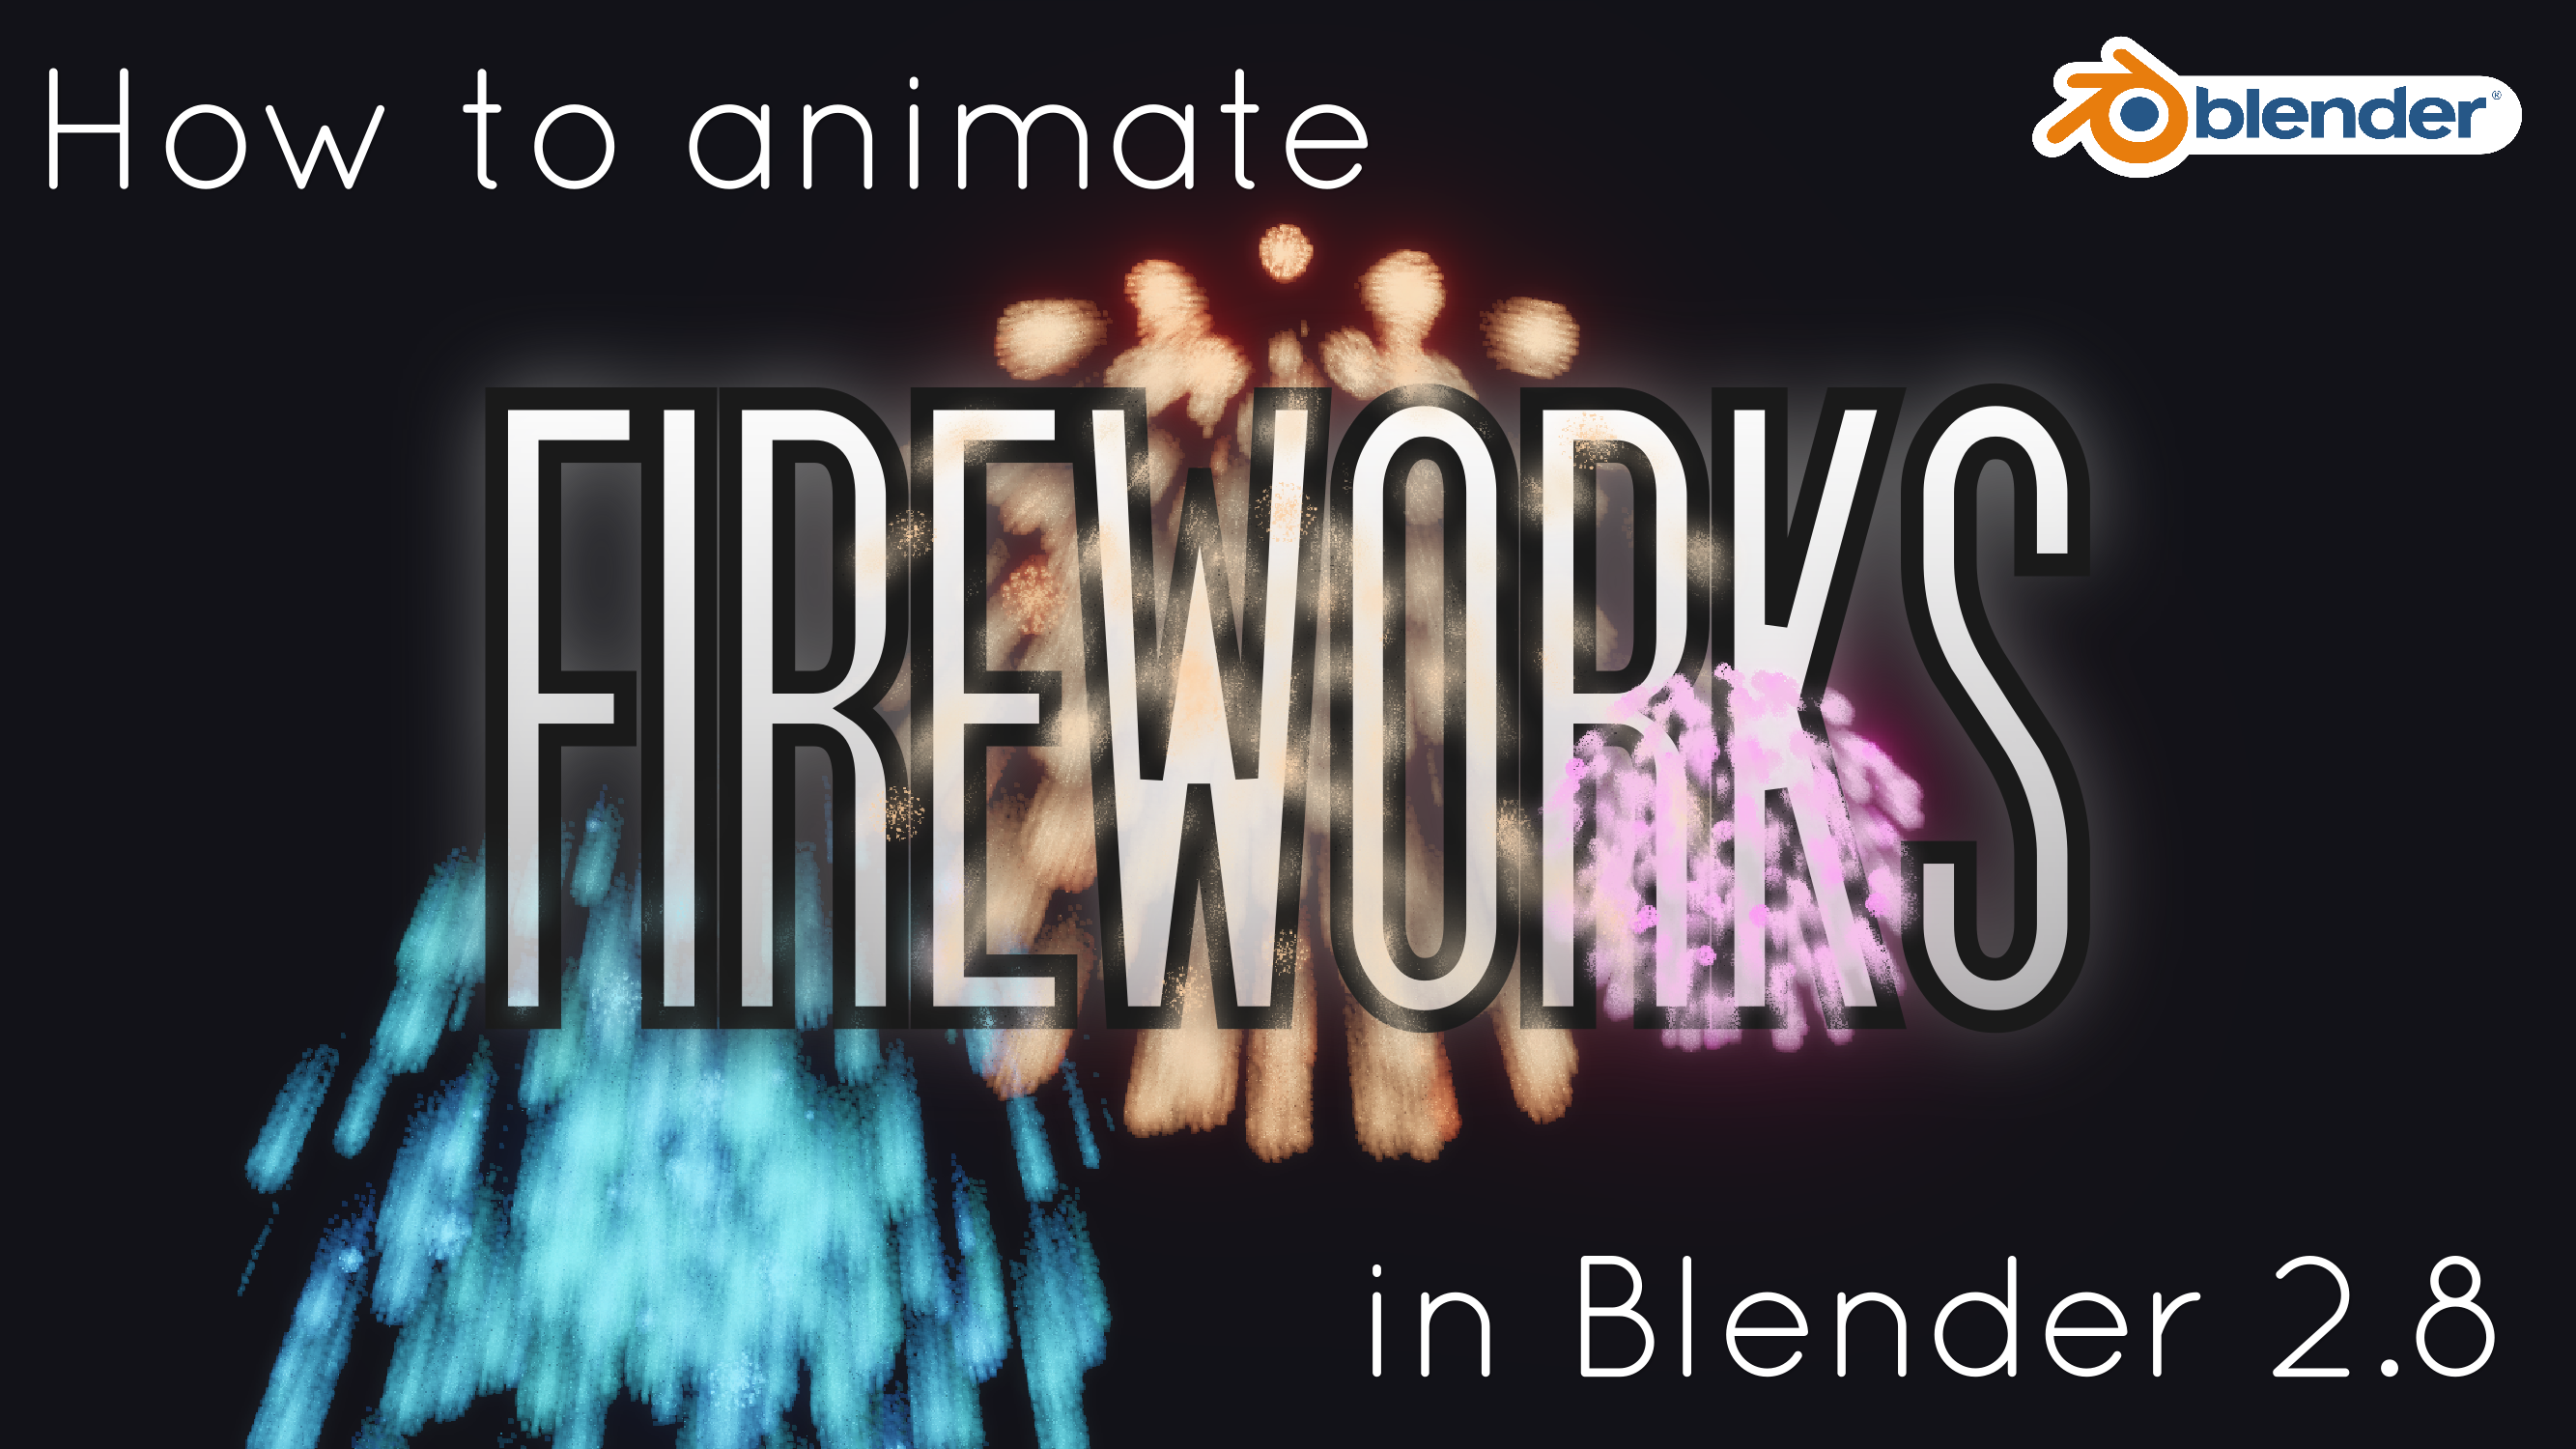 https://d33wubrfki0l68.cloudfront.net/a270339b03a94e2b7a21a34303d4efc344967191/dd0ee/post/animating-fireworks-with-blender-2-8/images/thumb.png